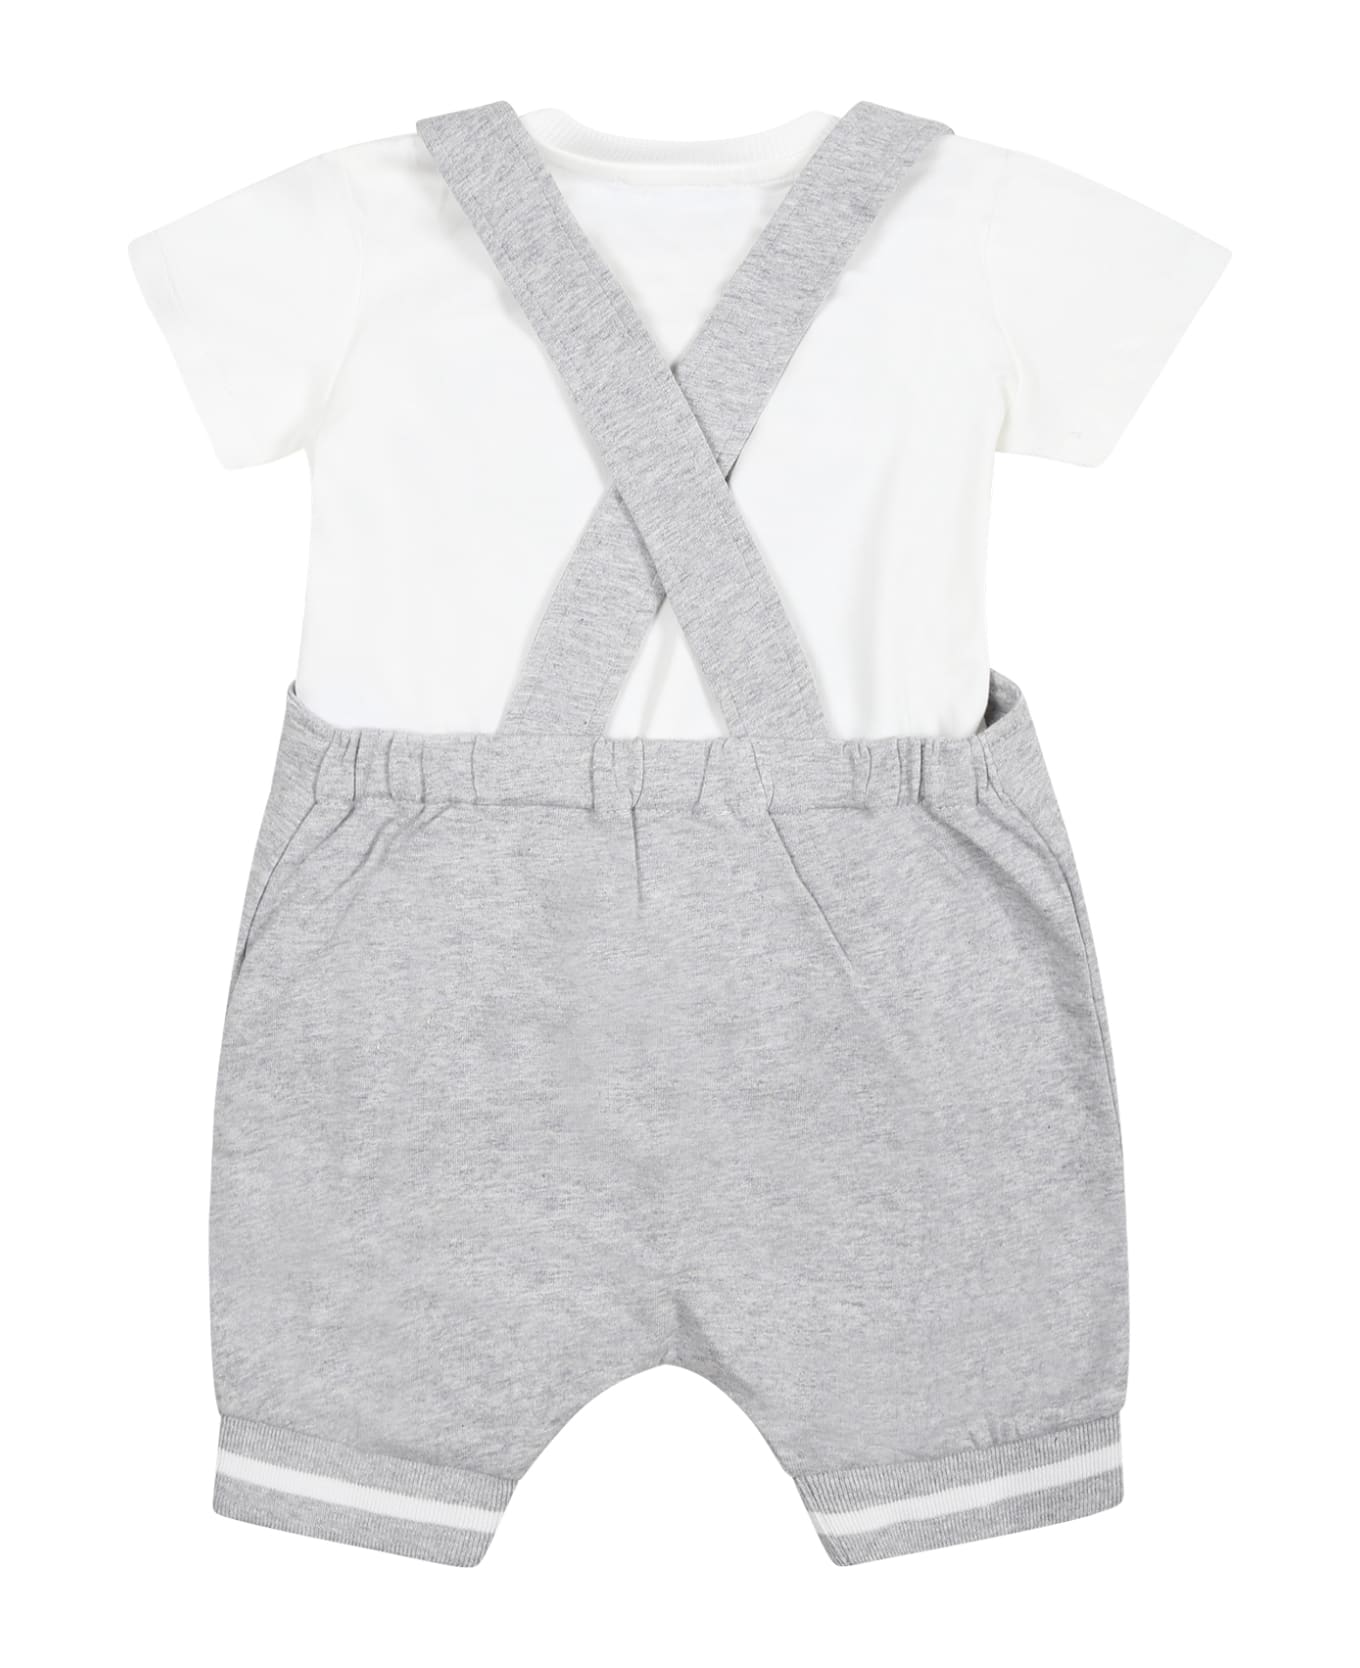 Moschino Gray Dungarees For Baby Boy With Teddy Bear - Grey